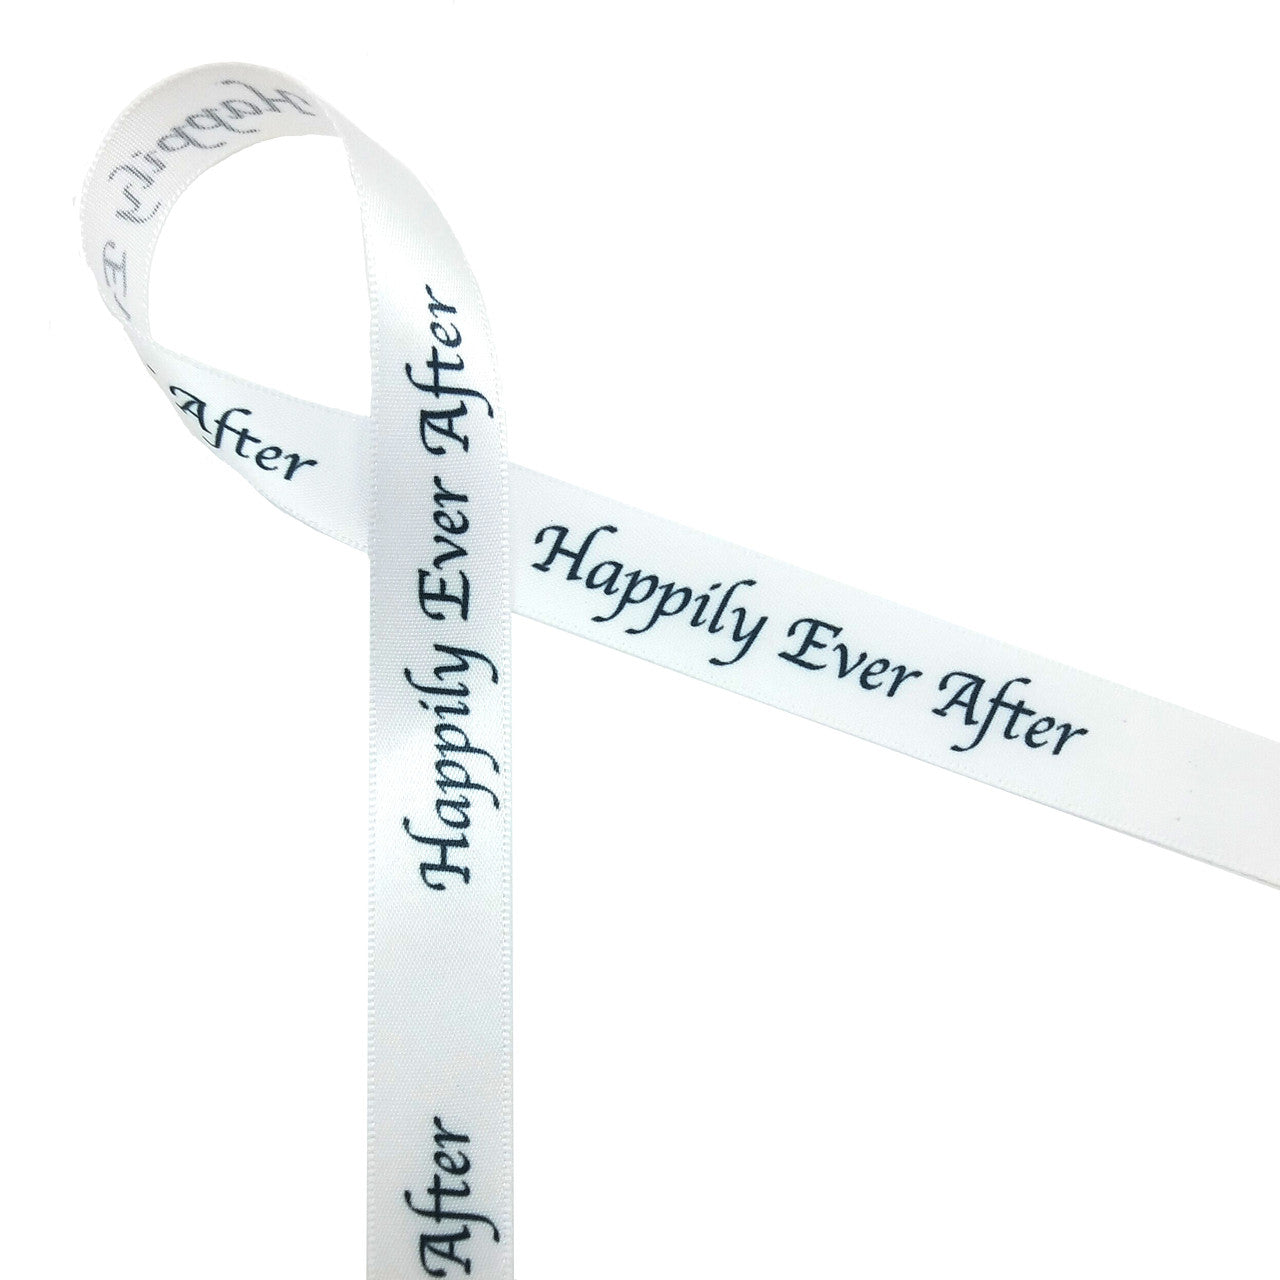 Happily Every After Ribbon Black Ink on 5/8" wide White Satin Ribbon